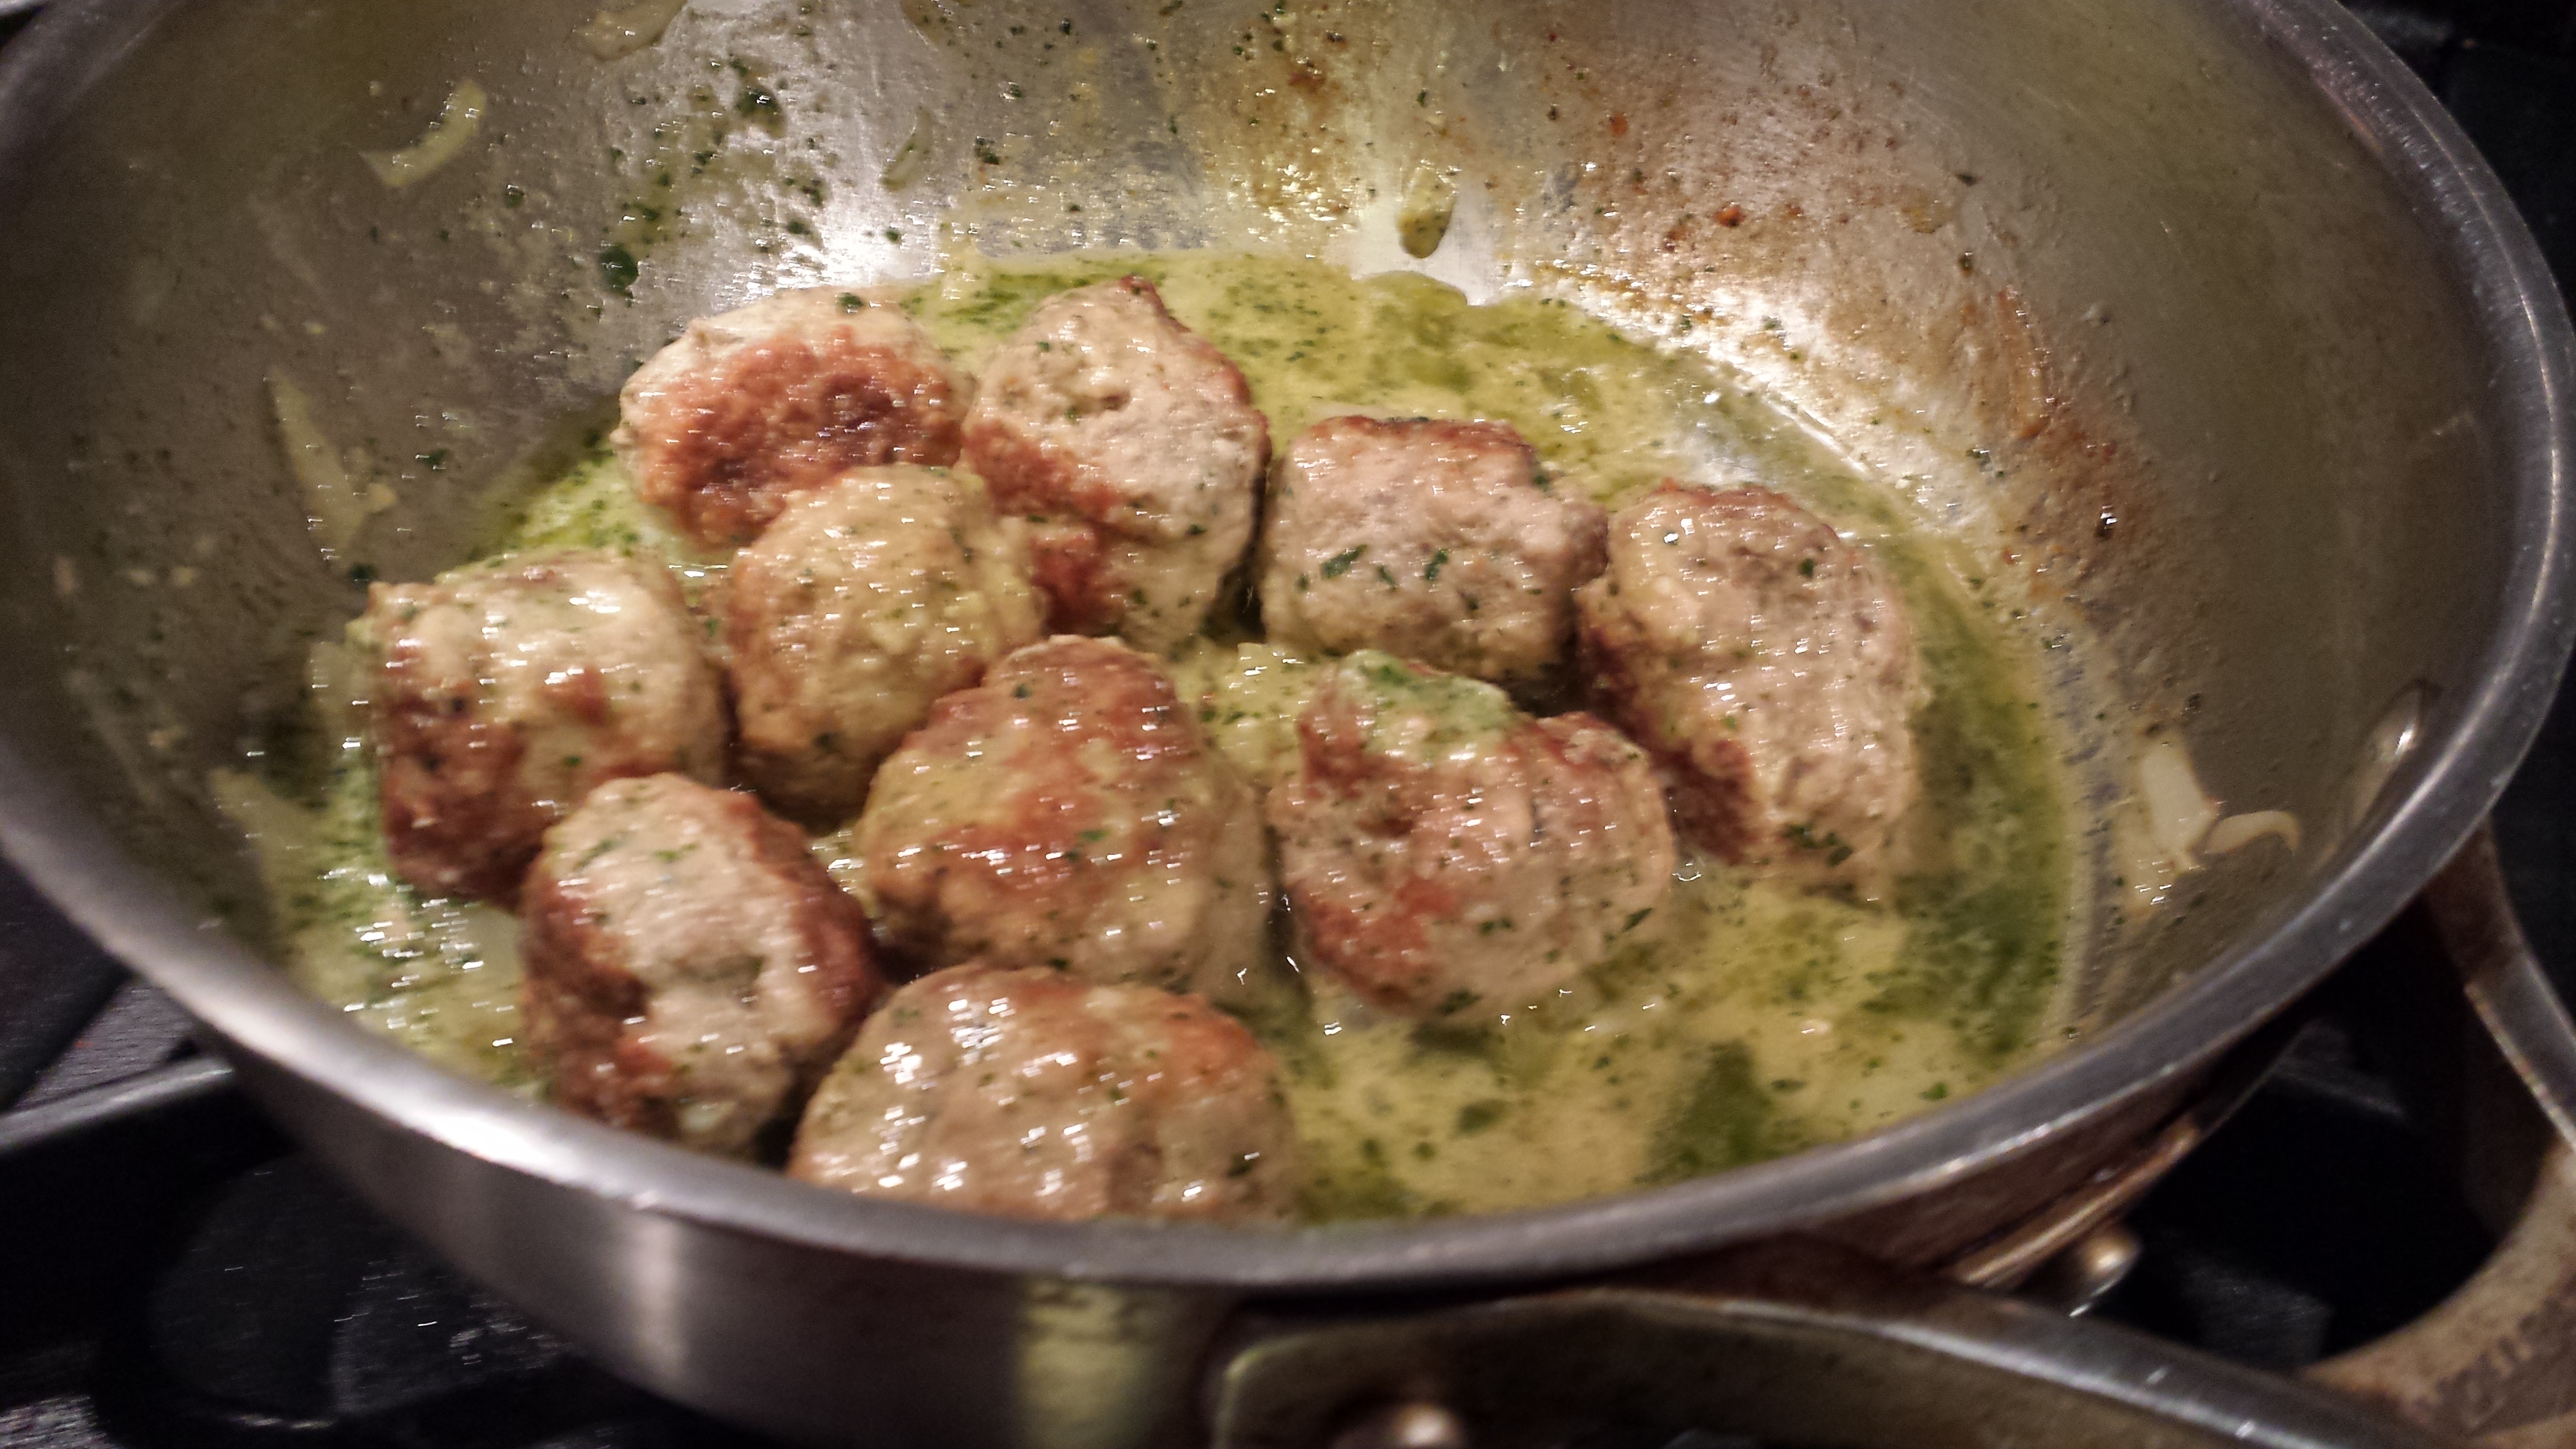 Stir the meatballs and the pesto (Photo Credit: Adroit Ideals)